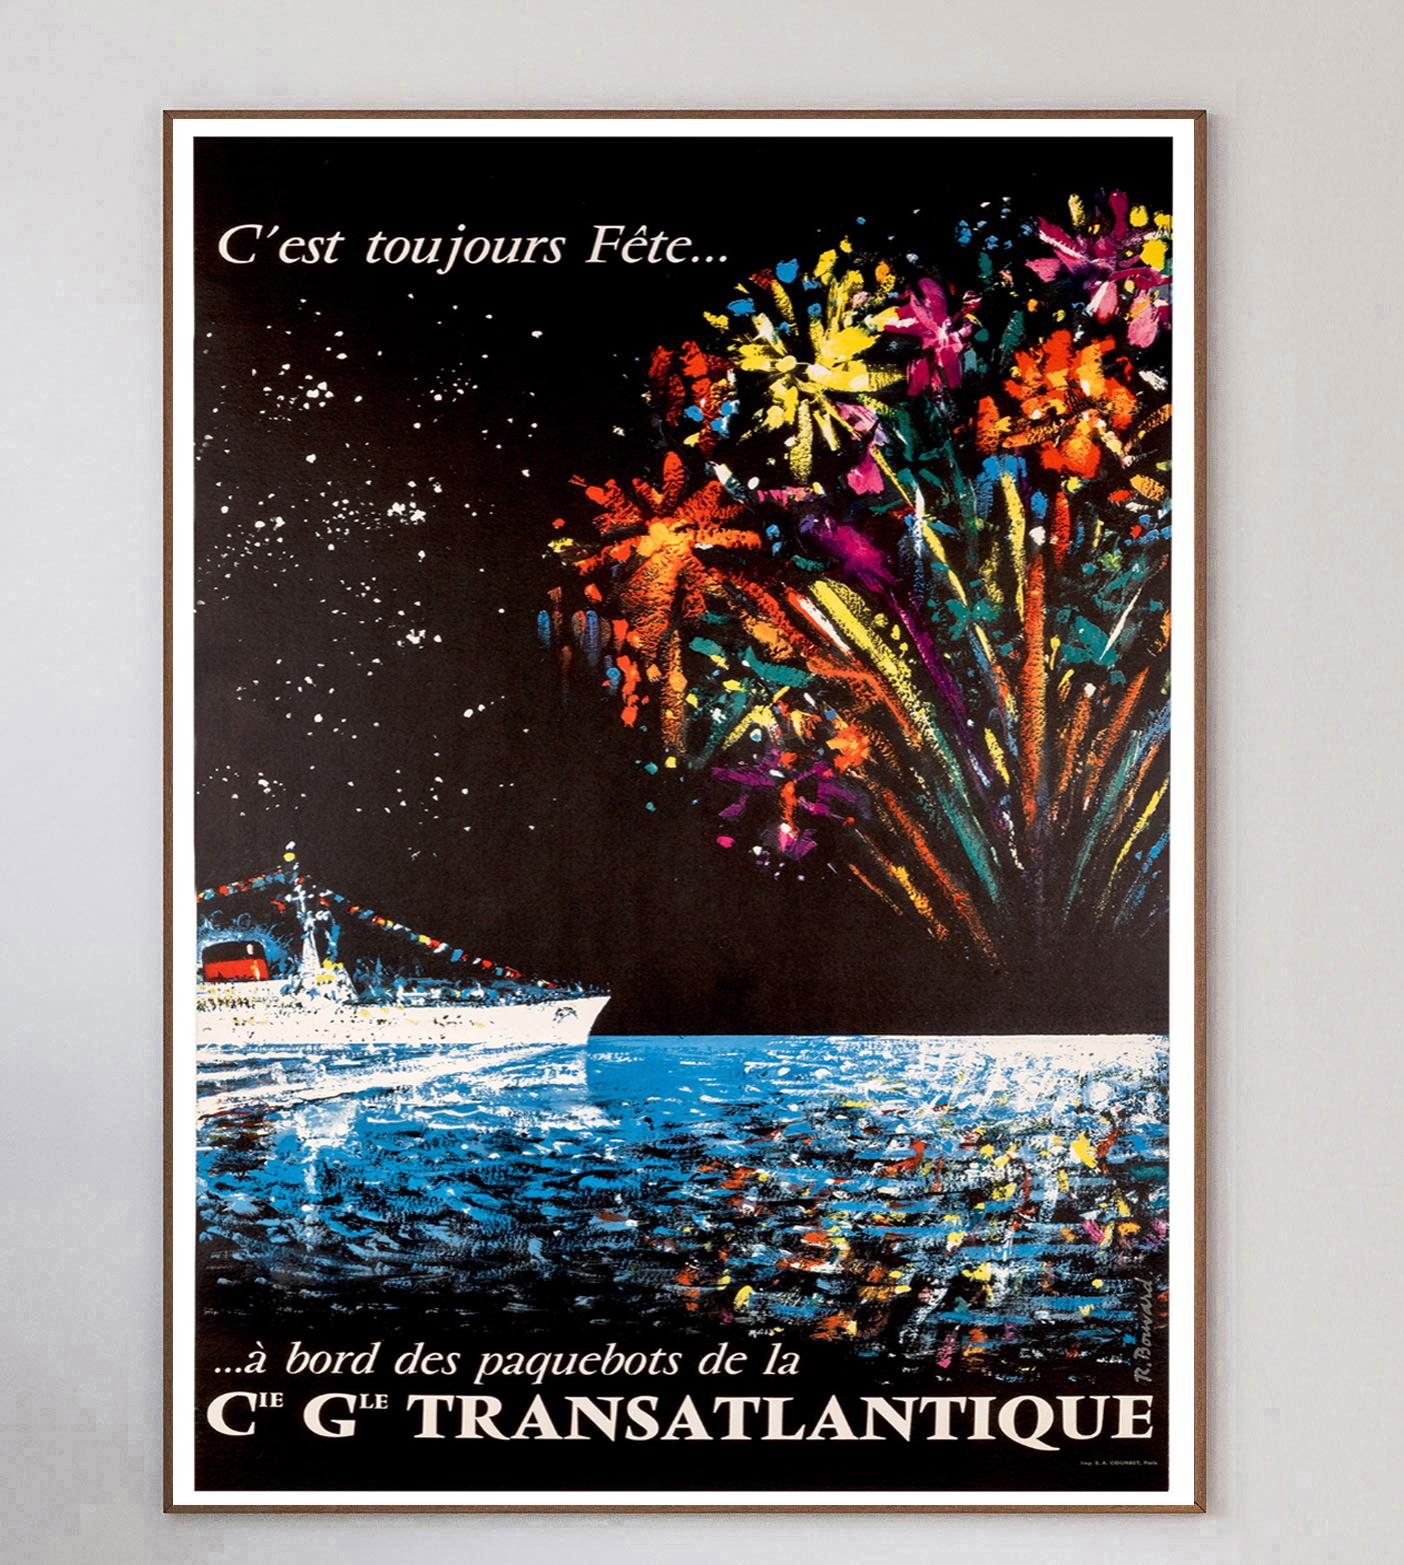 With beautiful artwork from Rene Bouvard, this 1949 poster for 